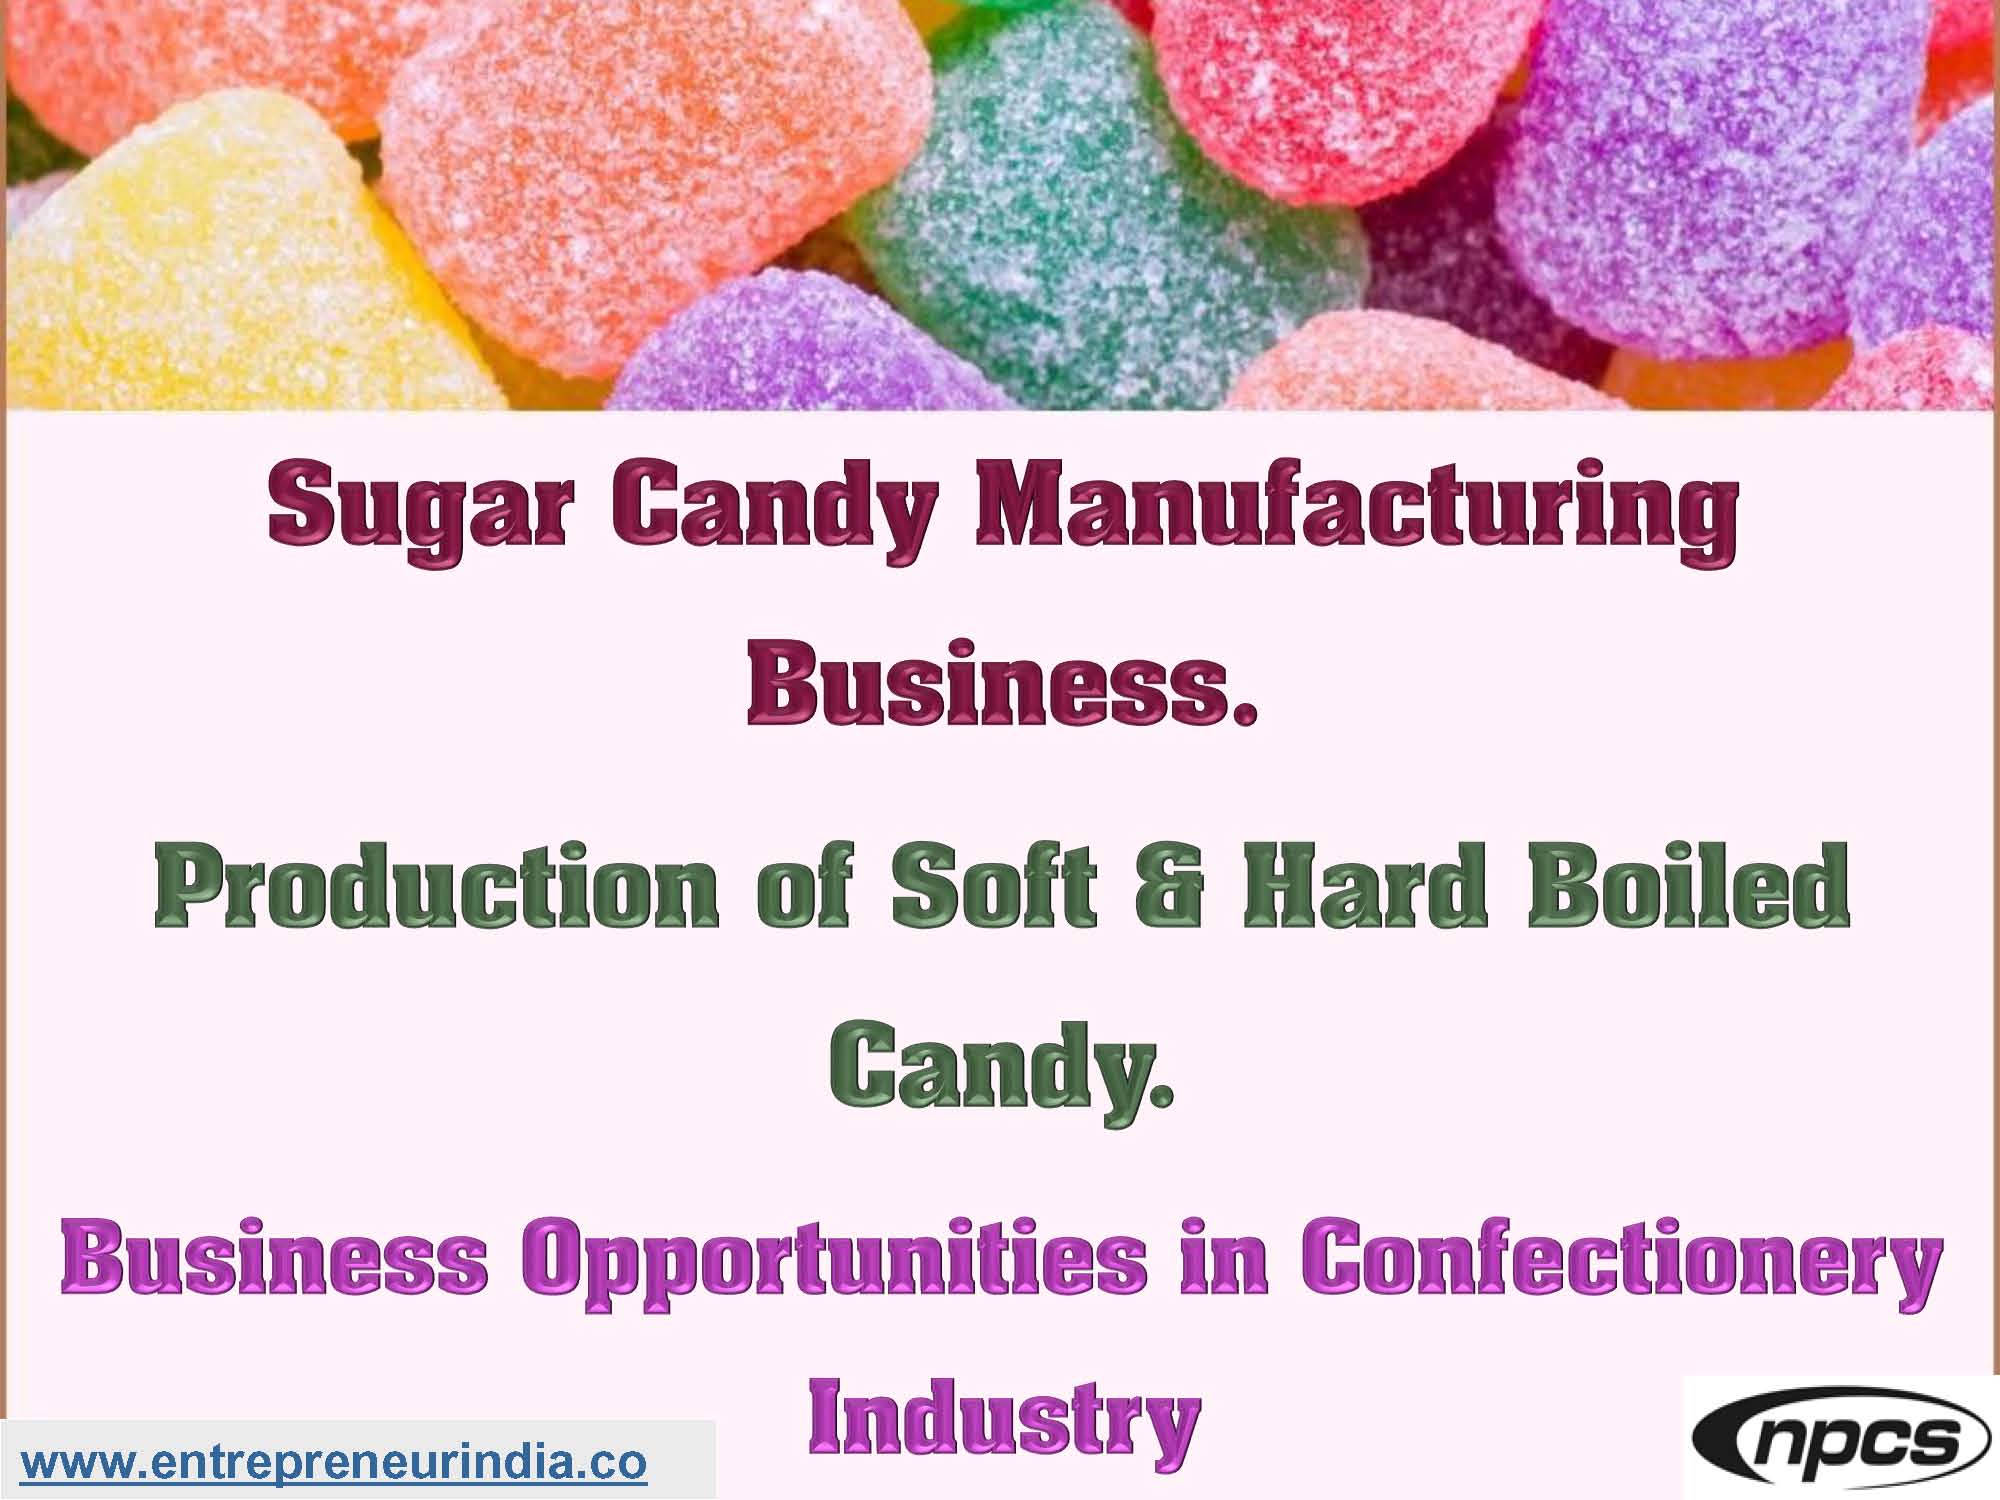 Sugar Candy Manufacturing Business